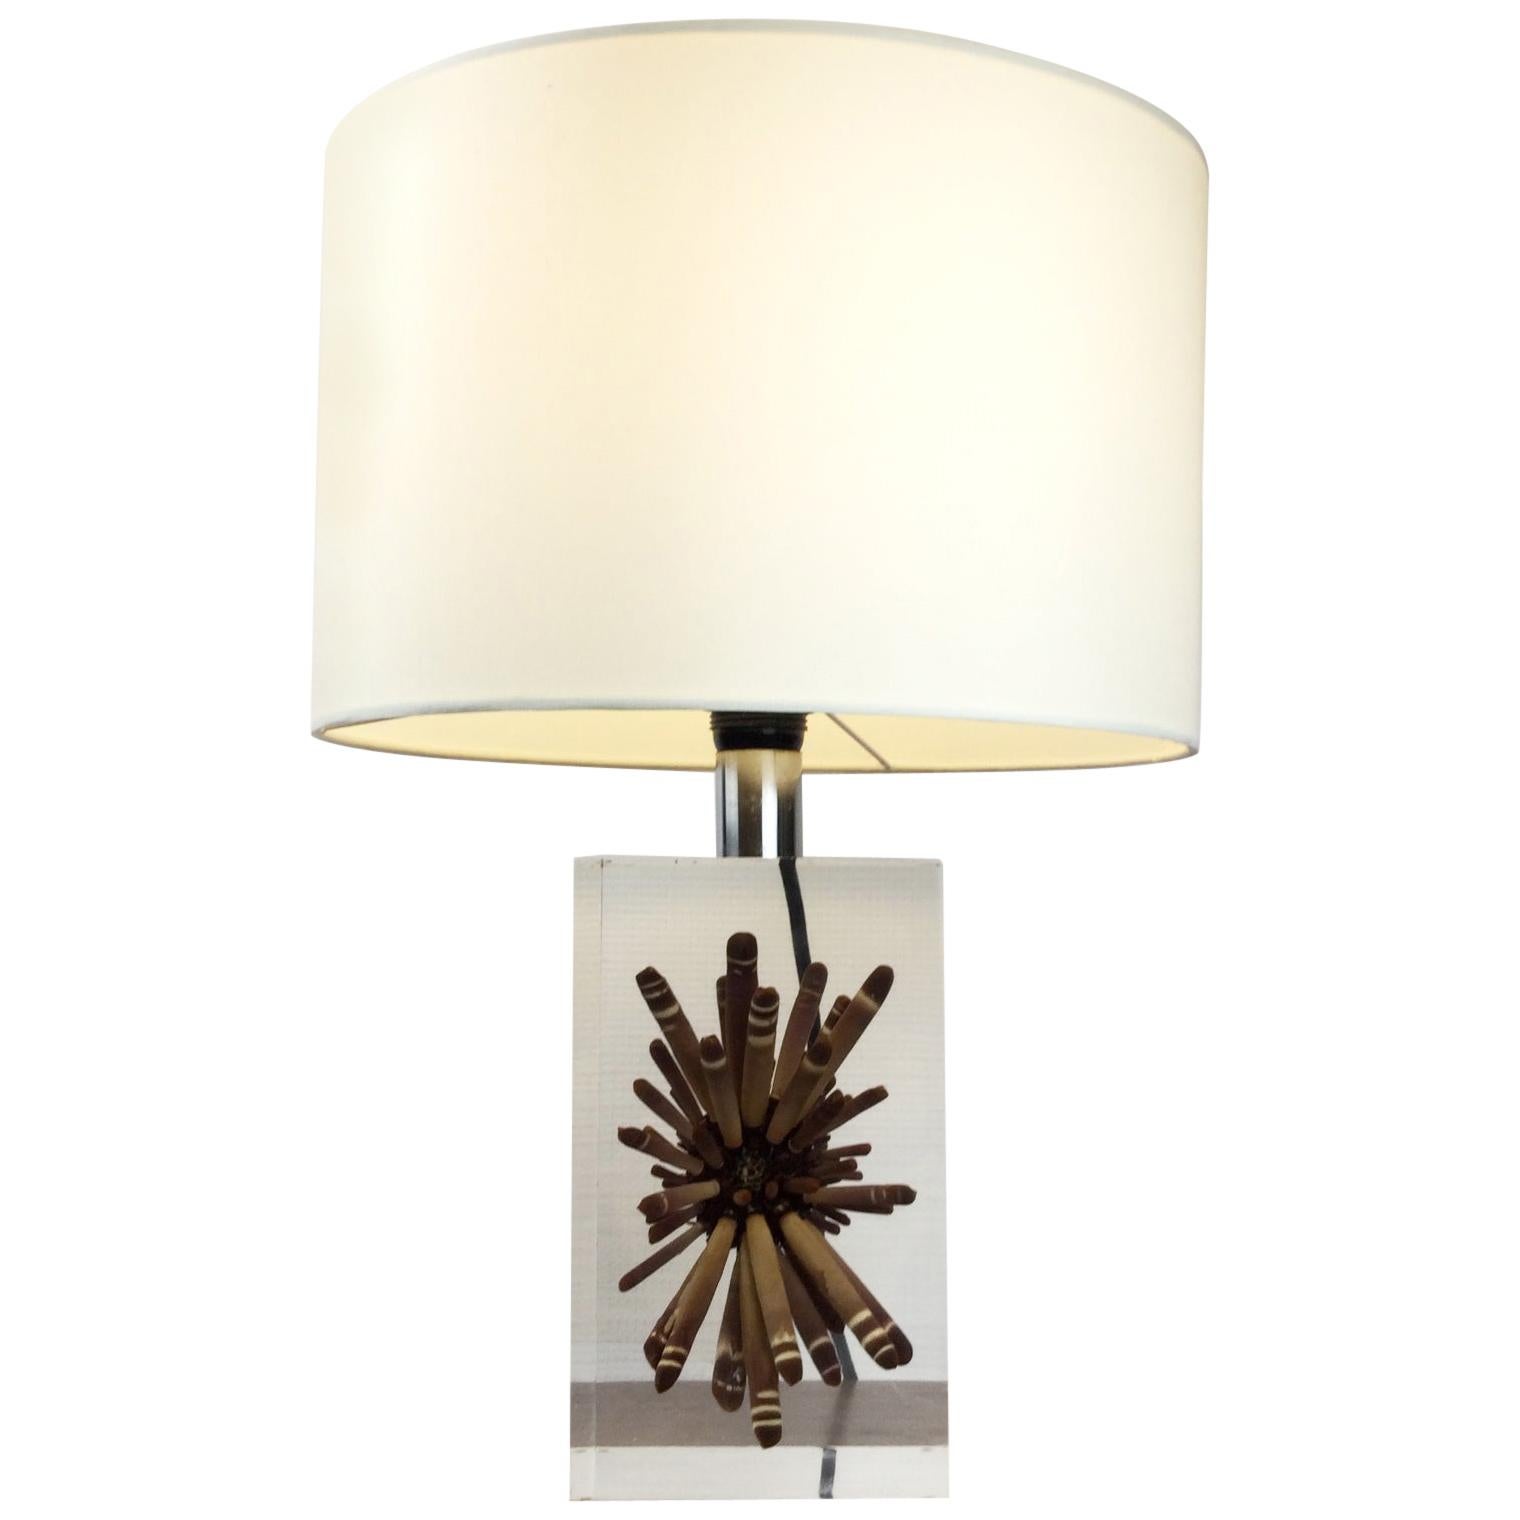 Pierre Giraudon 1970s Large Resin Table Lamp with Tropical Ursin Inclusion For Sale